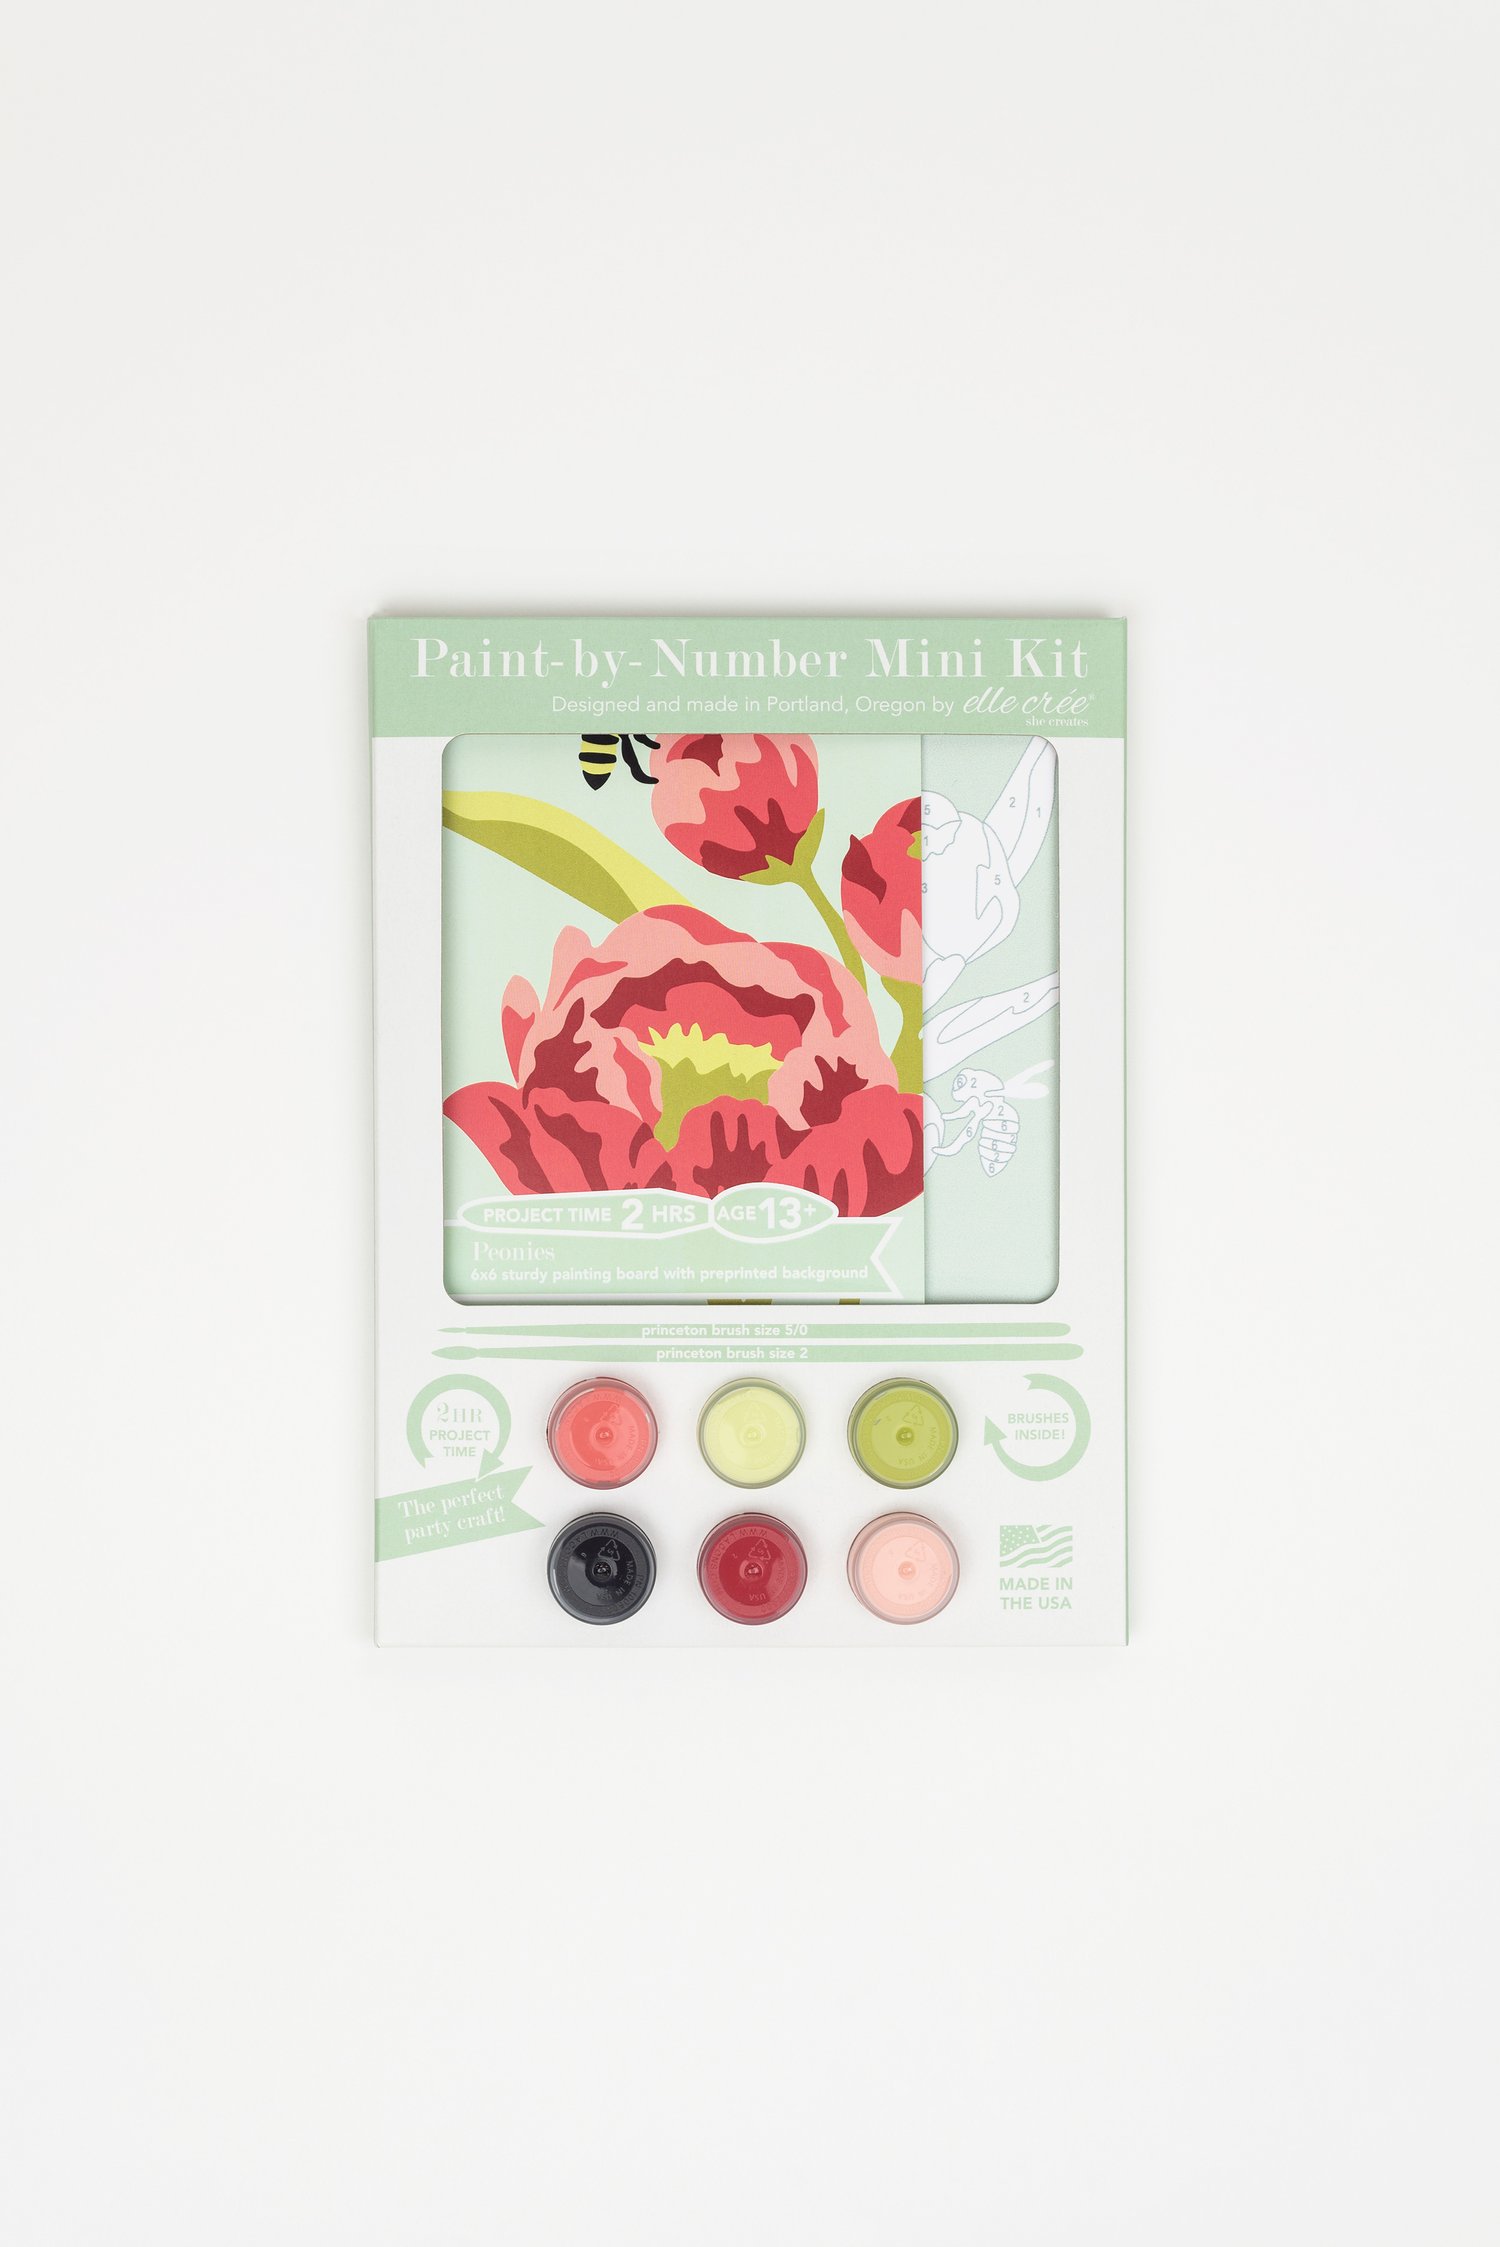 Michelle with Peonies Paint by Numbers Kit – Crafty Wonderland